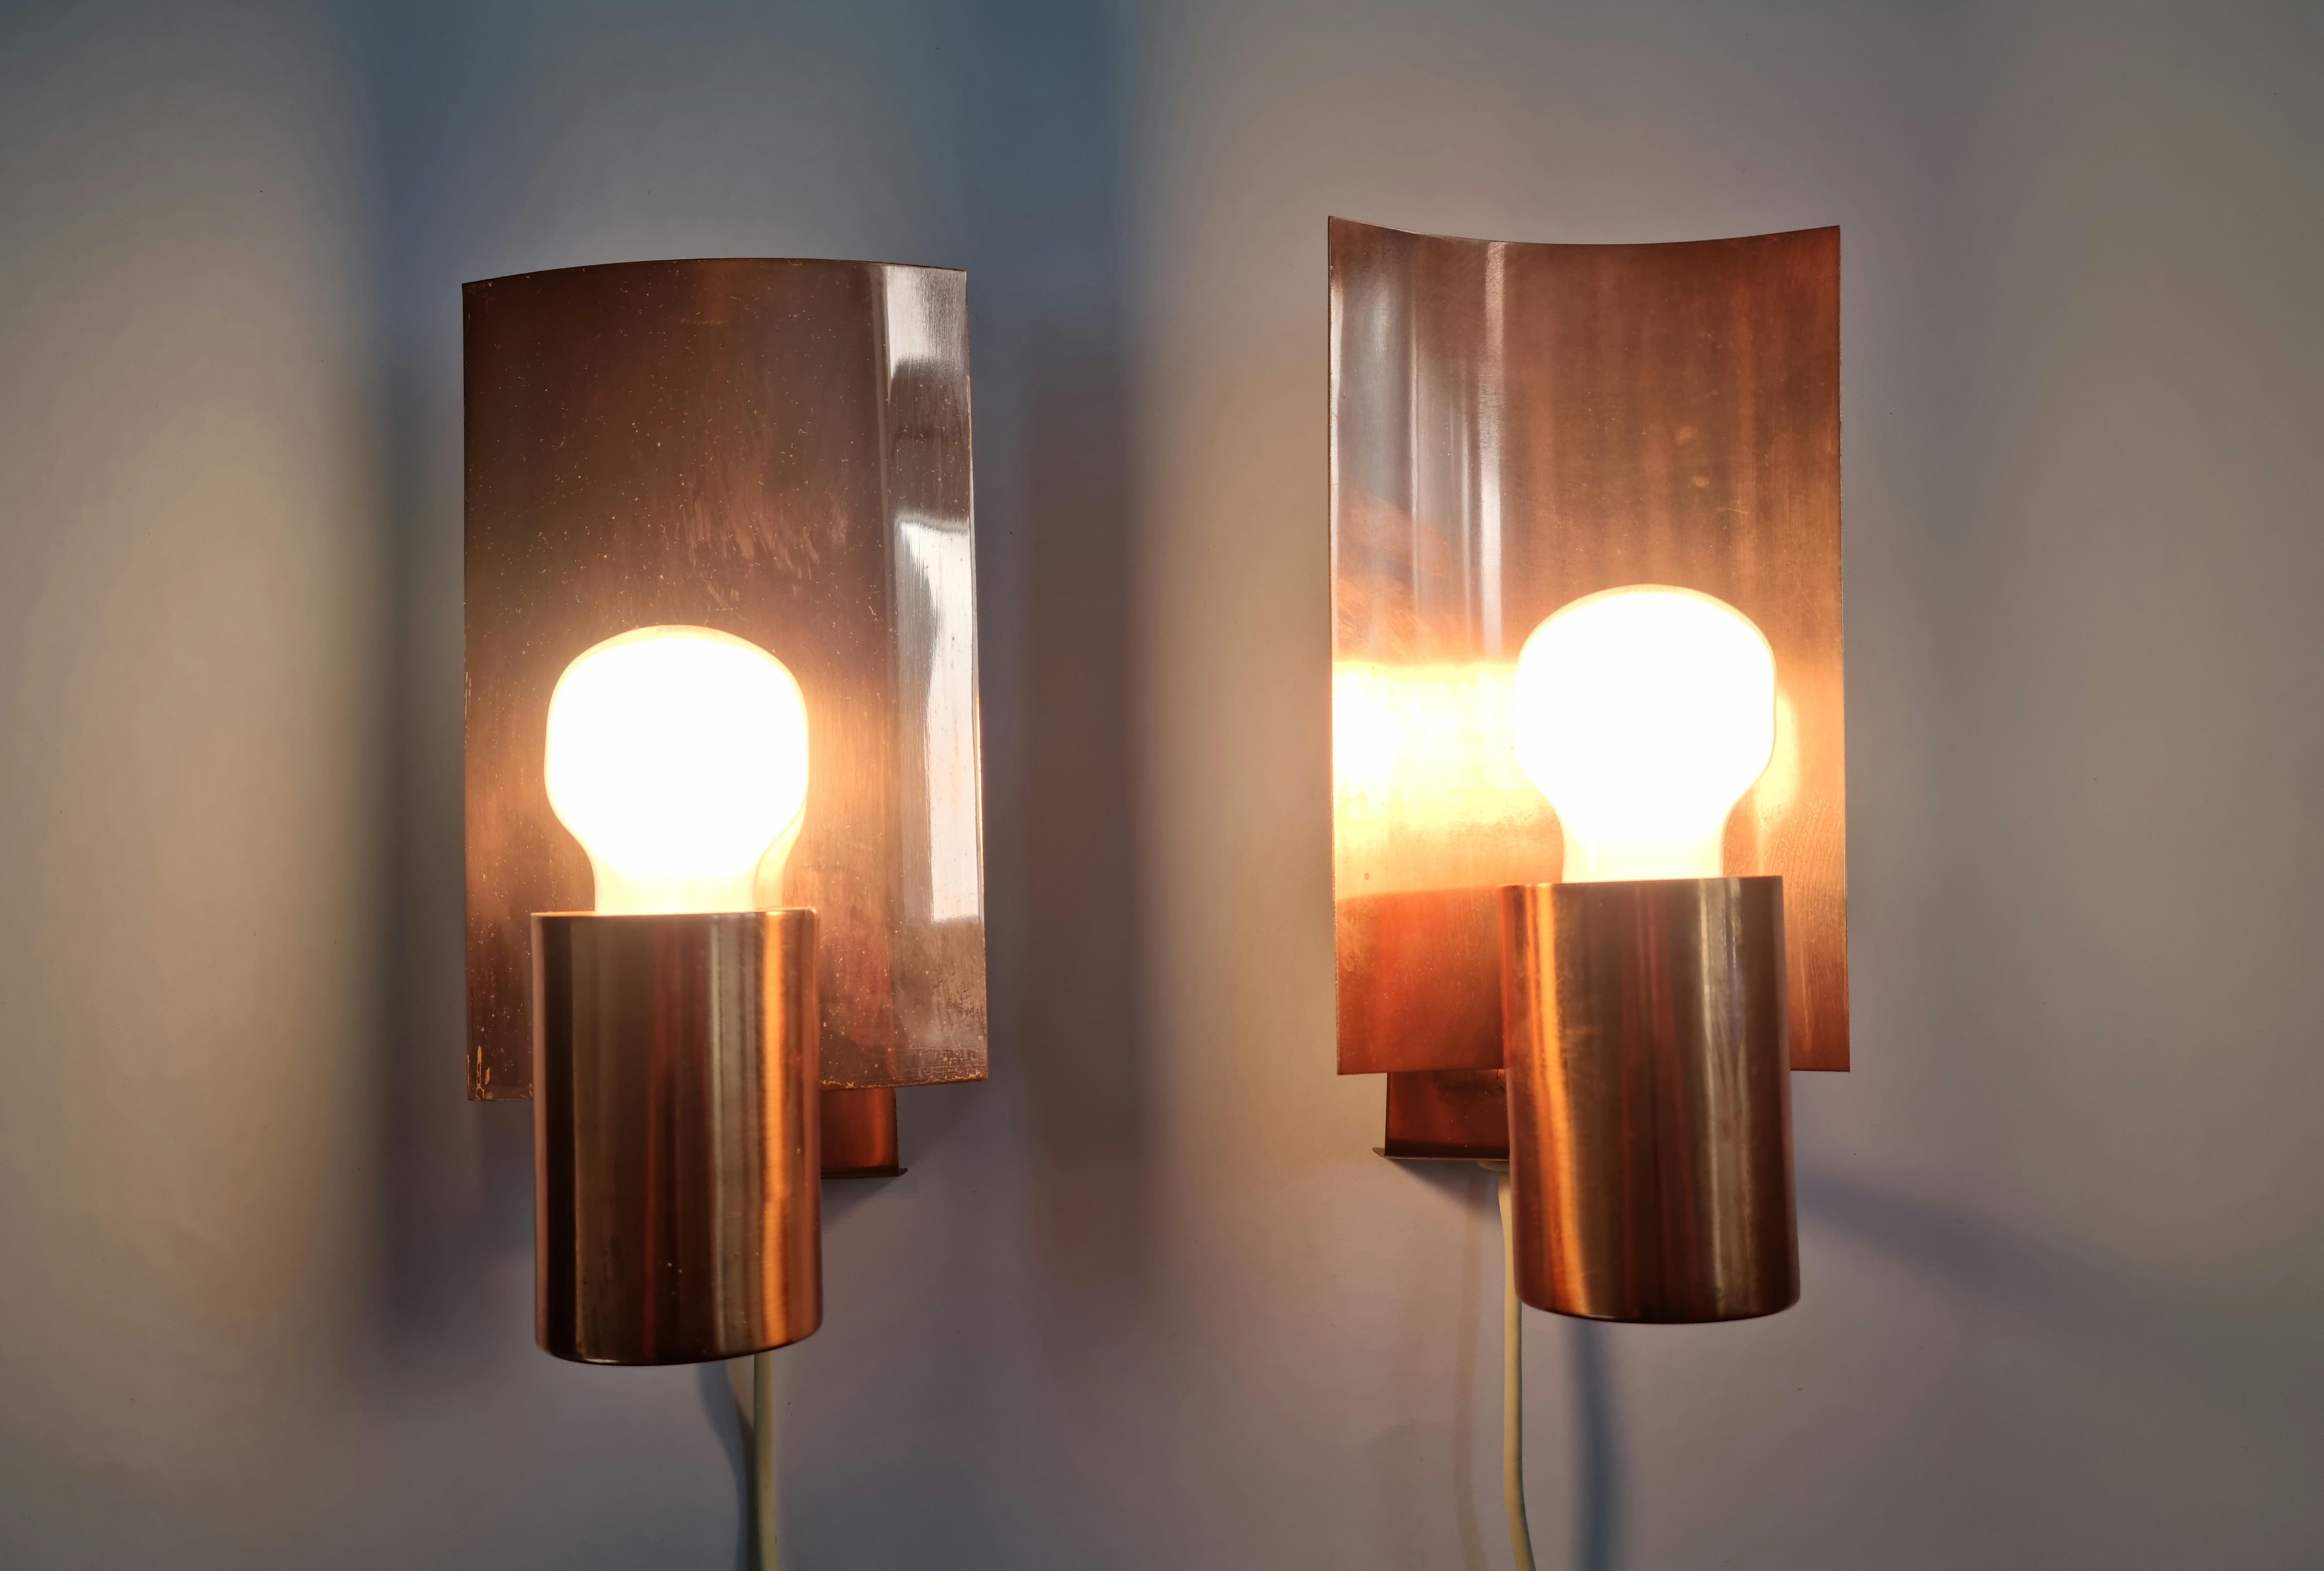 Pair of Midcentury Copper Wall Lamps, Denmark, 1960s For Sale 10